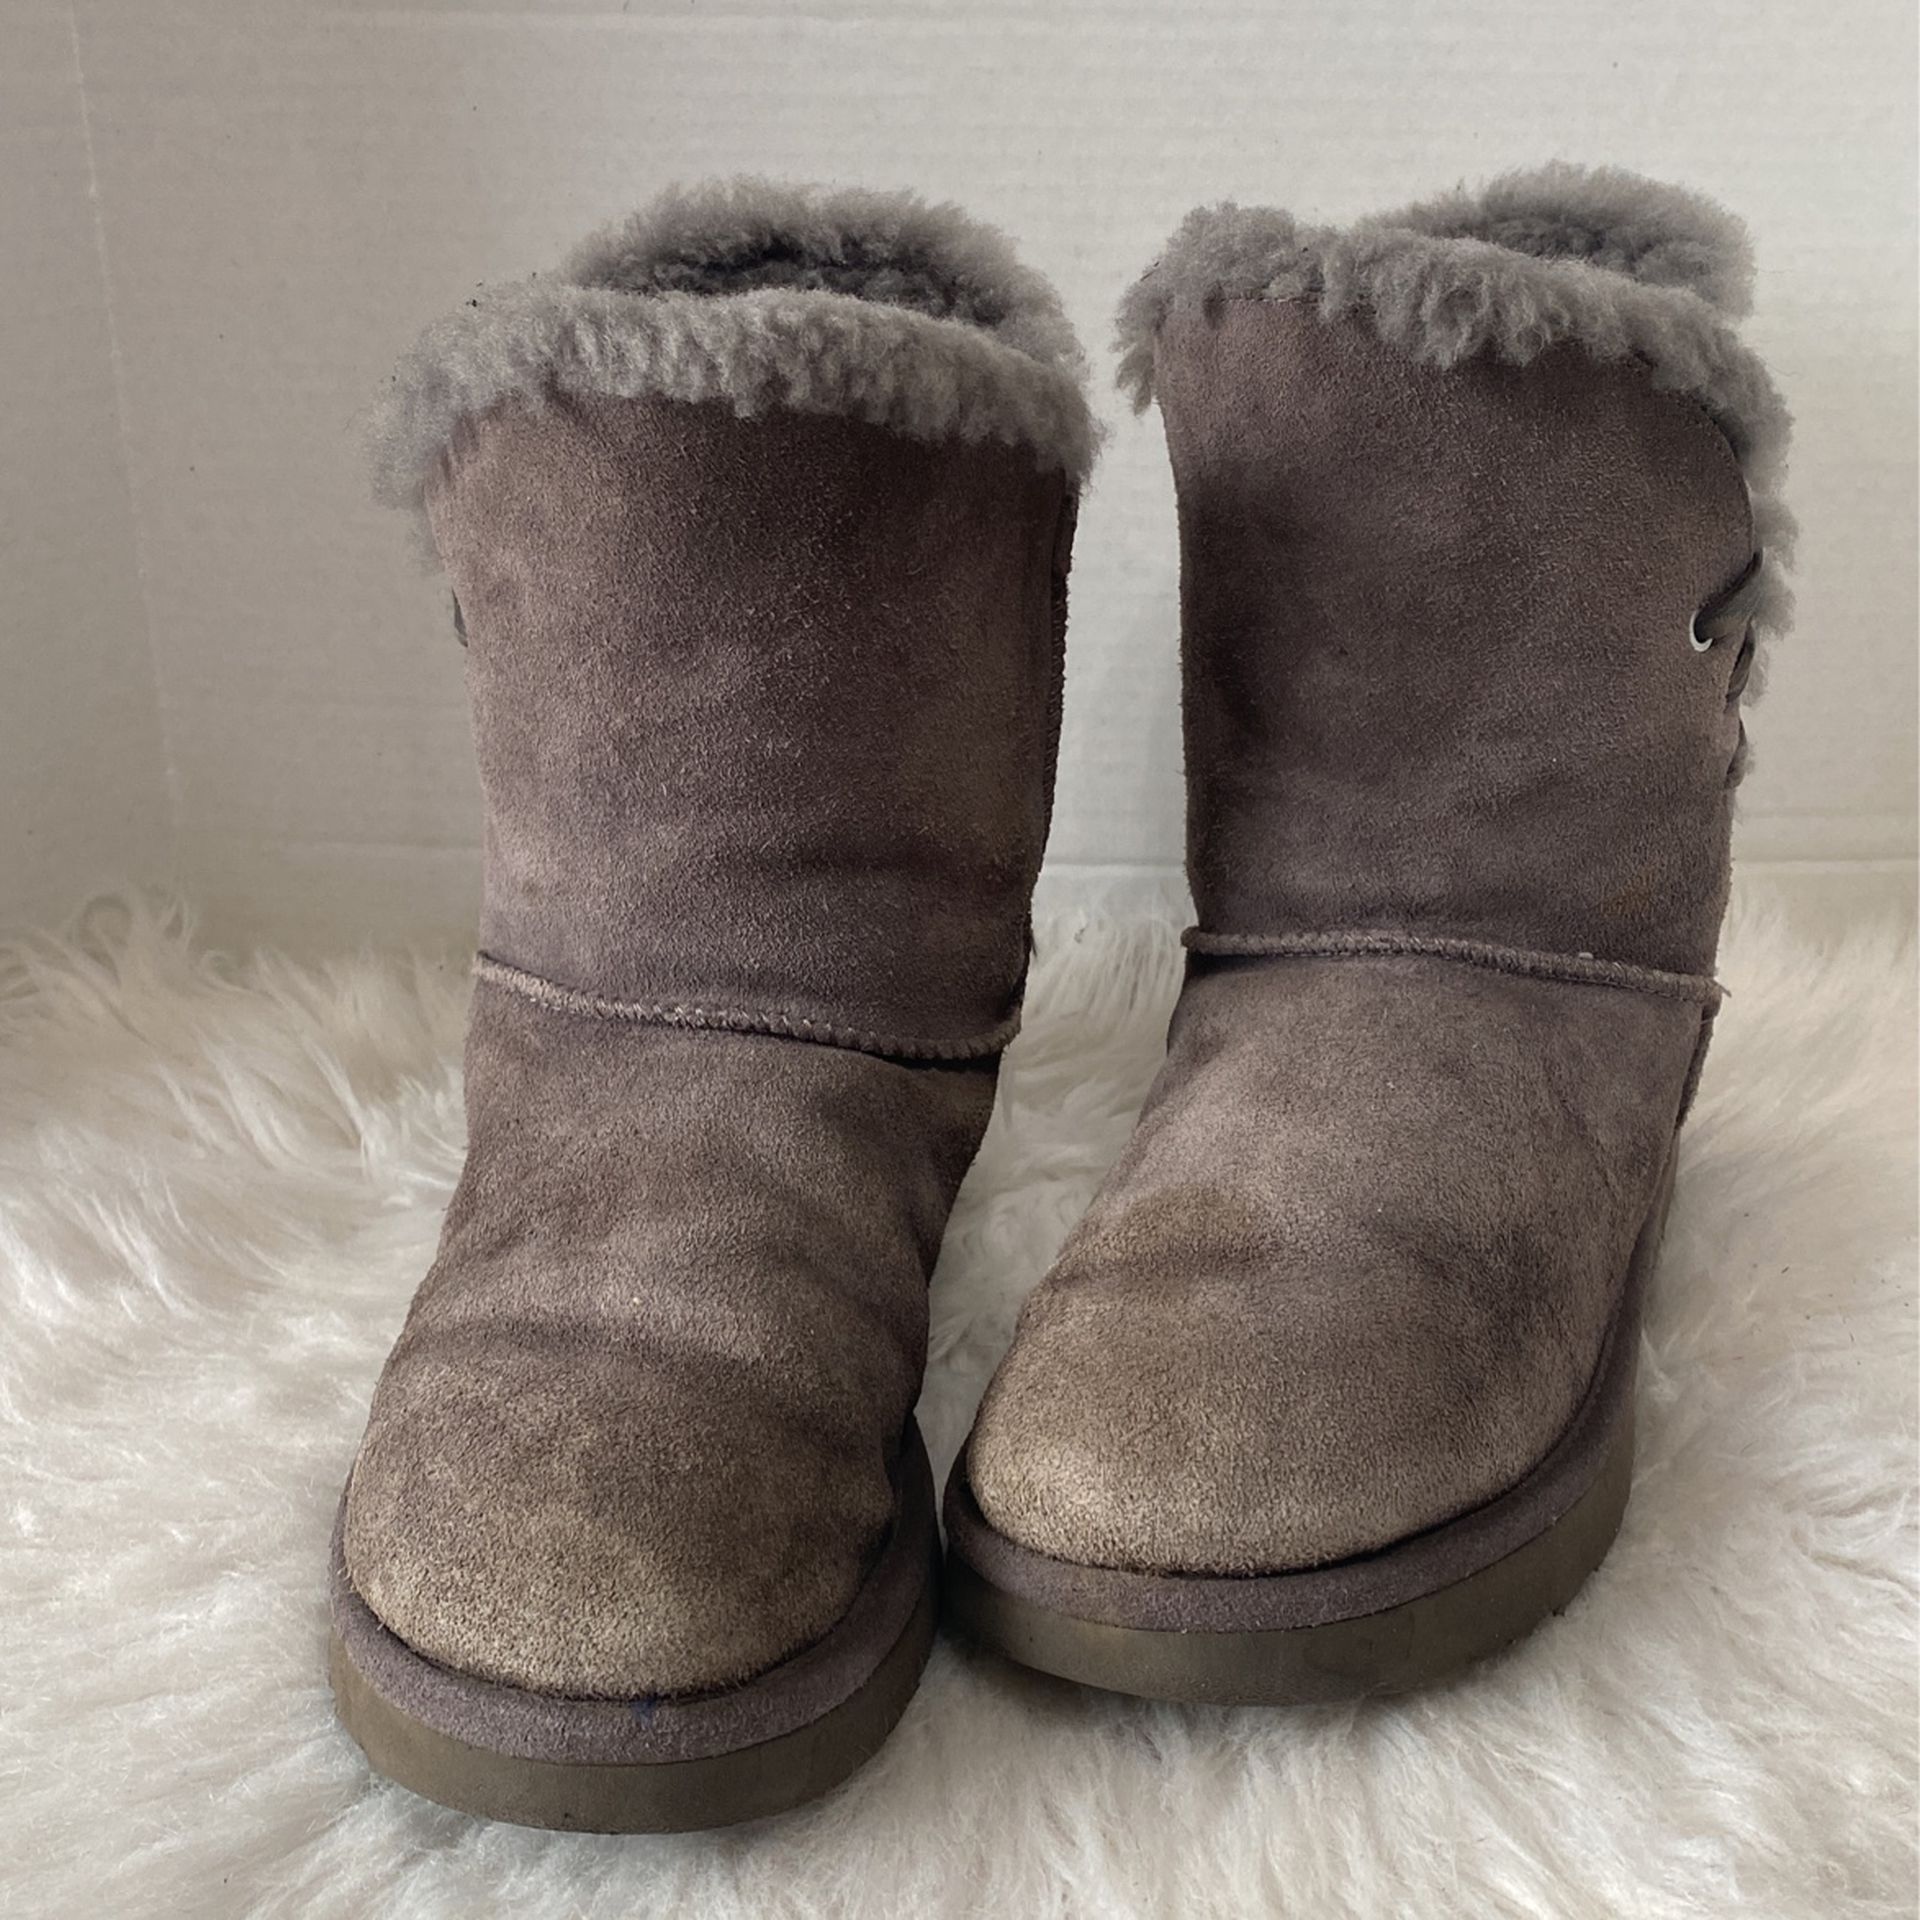 Ugg Boots Size 7